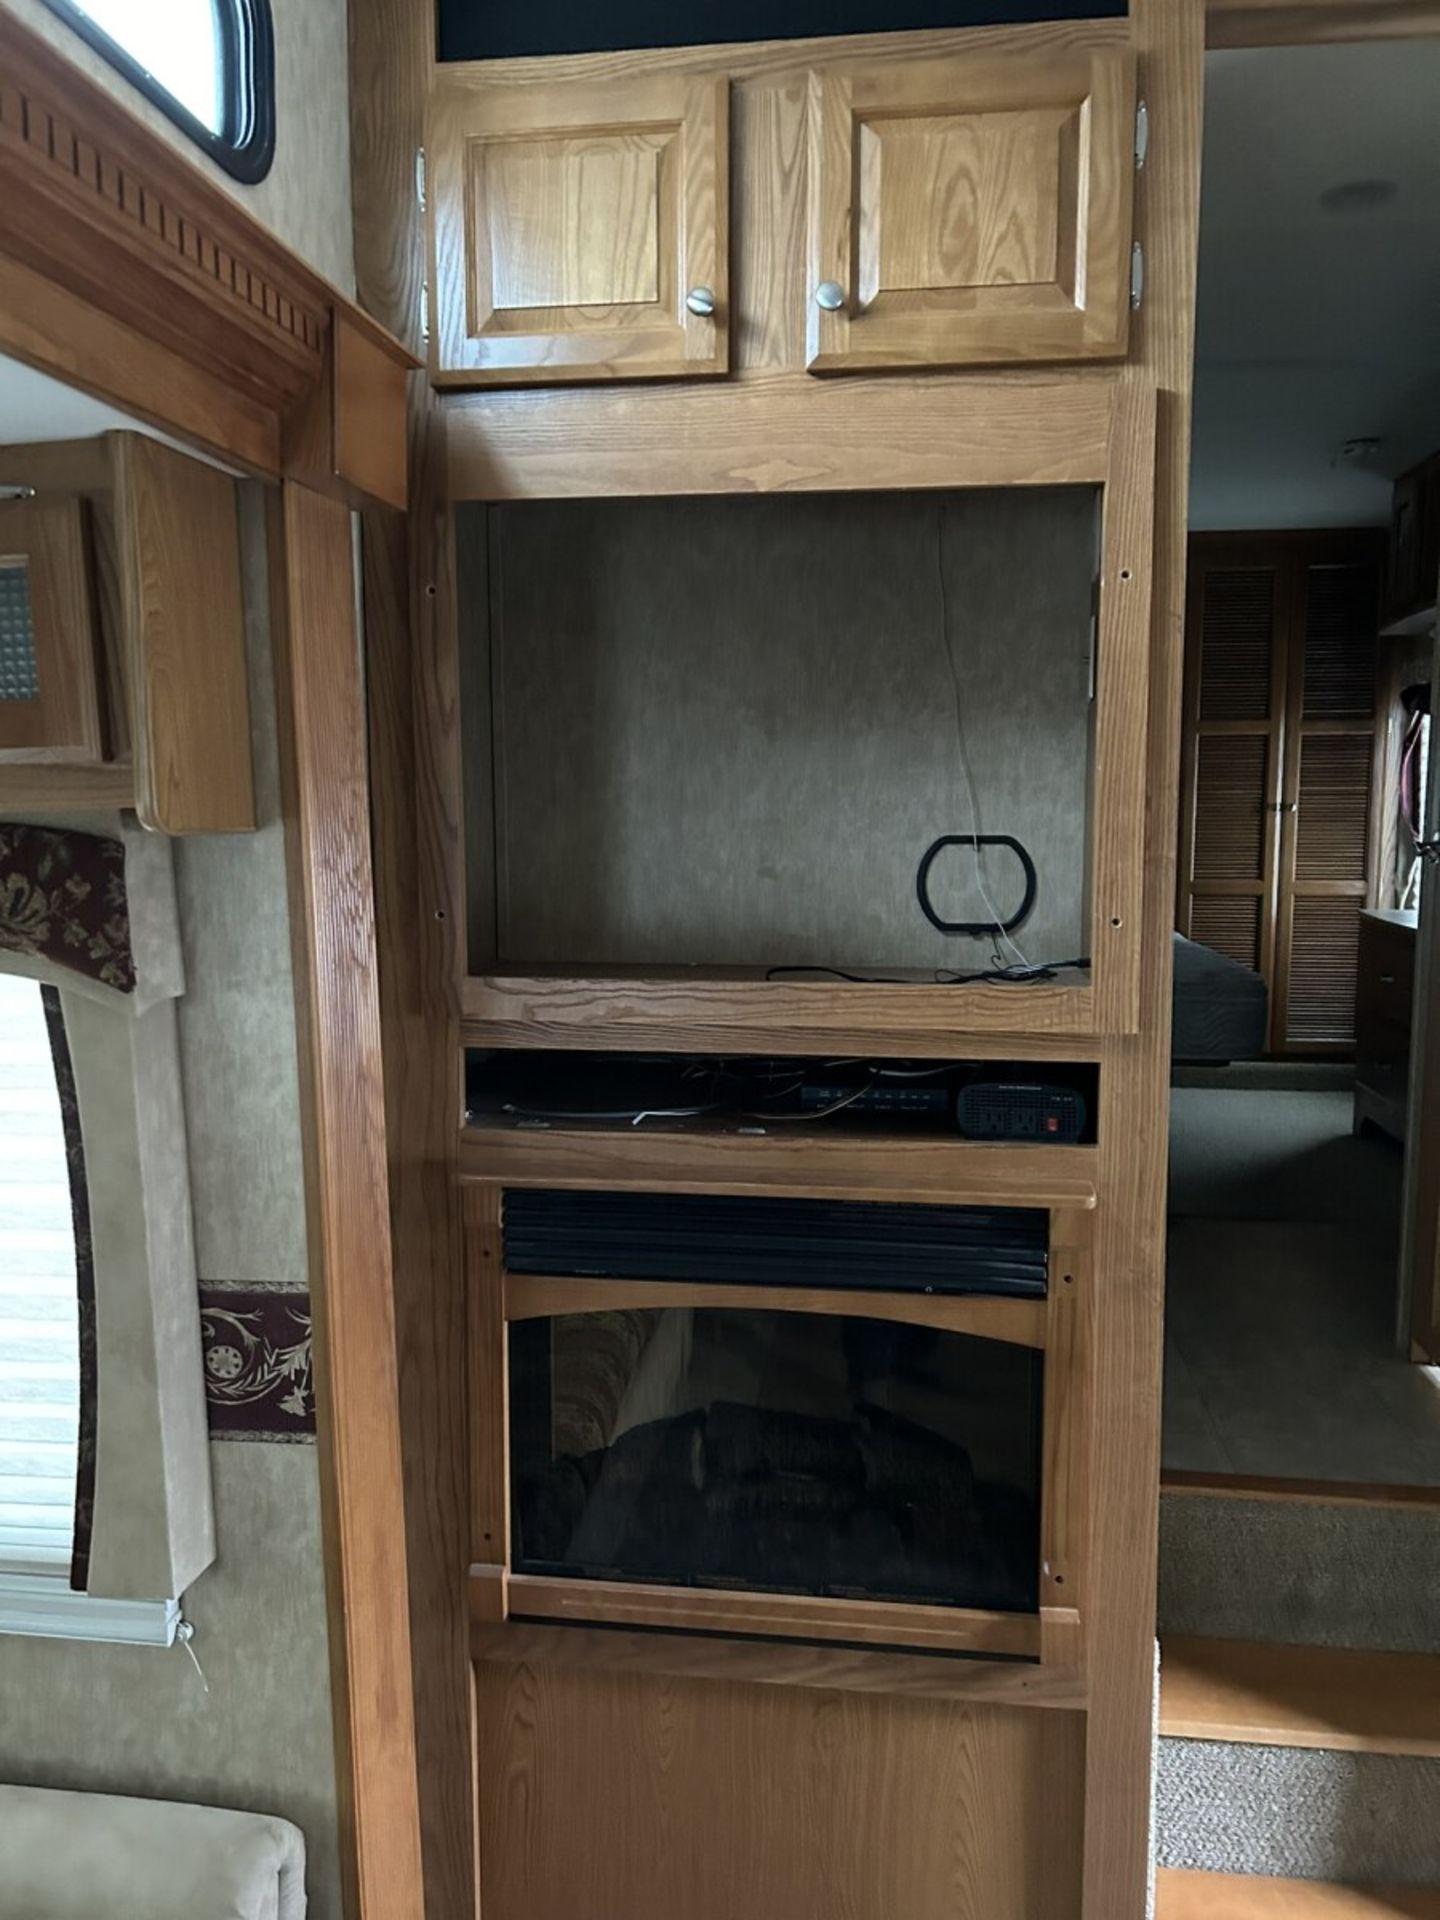 2007 GRAND JUNCTION 29DRK BY DUTCHMEN - DOUBLE SLIDE, AWNING, AC, REAR KITCHEN, FRONT QUEEN - Image 12 of 16